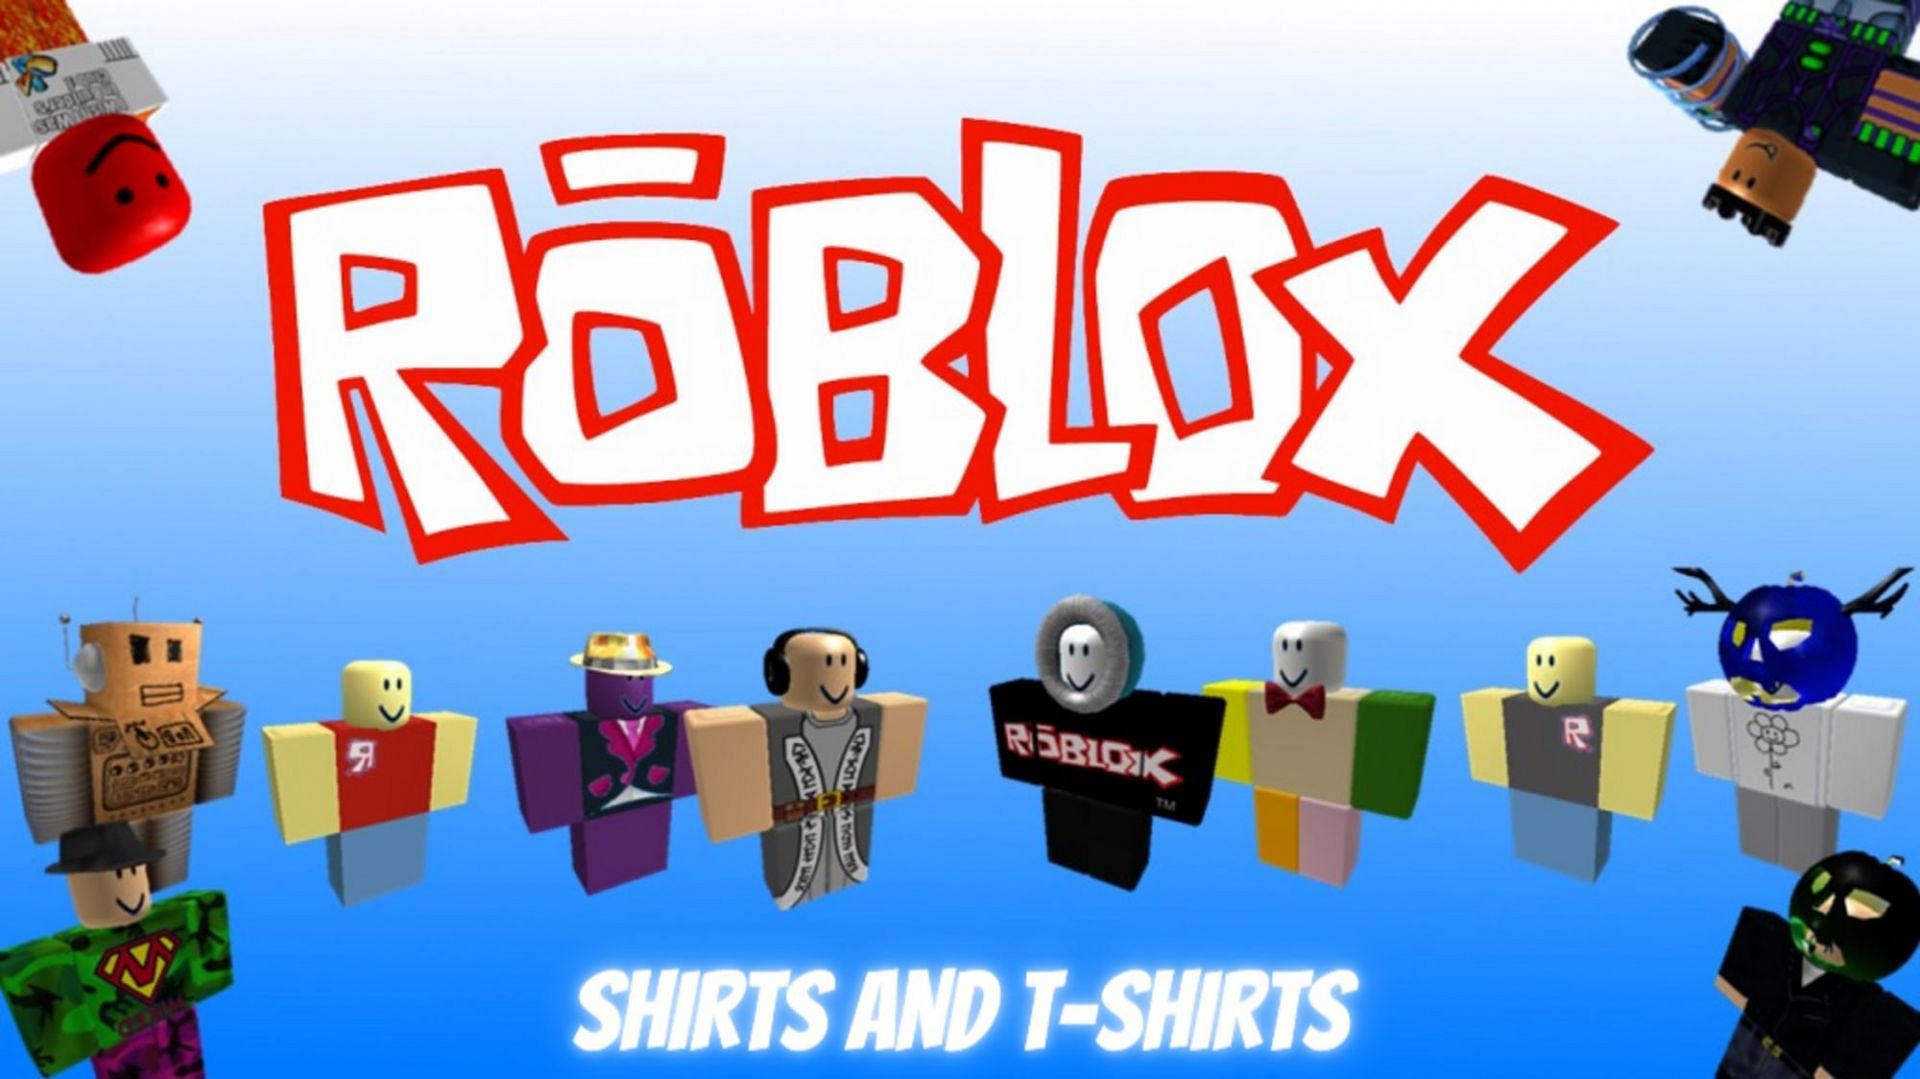 Shirts for roblox for Android - Free App Download